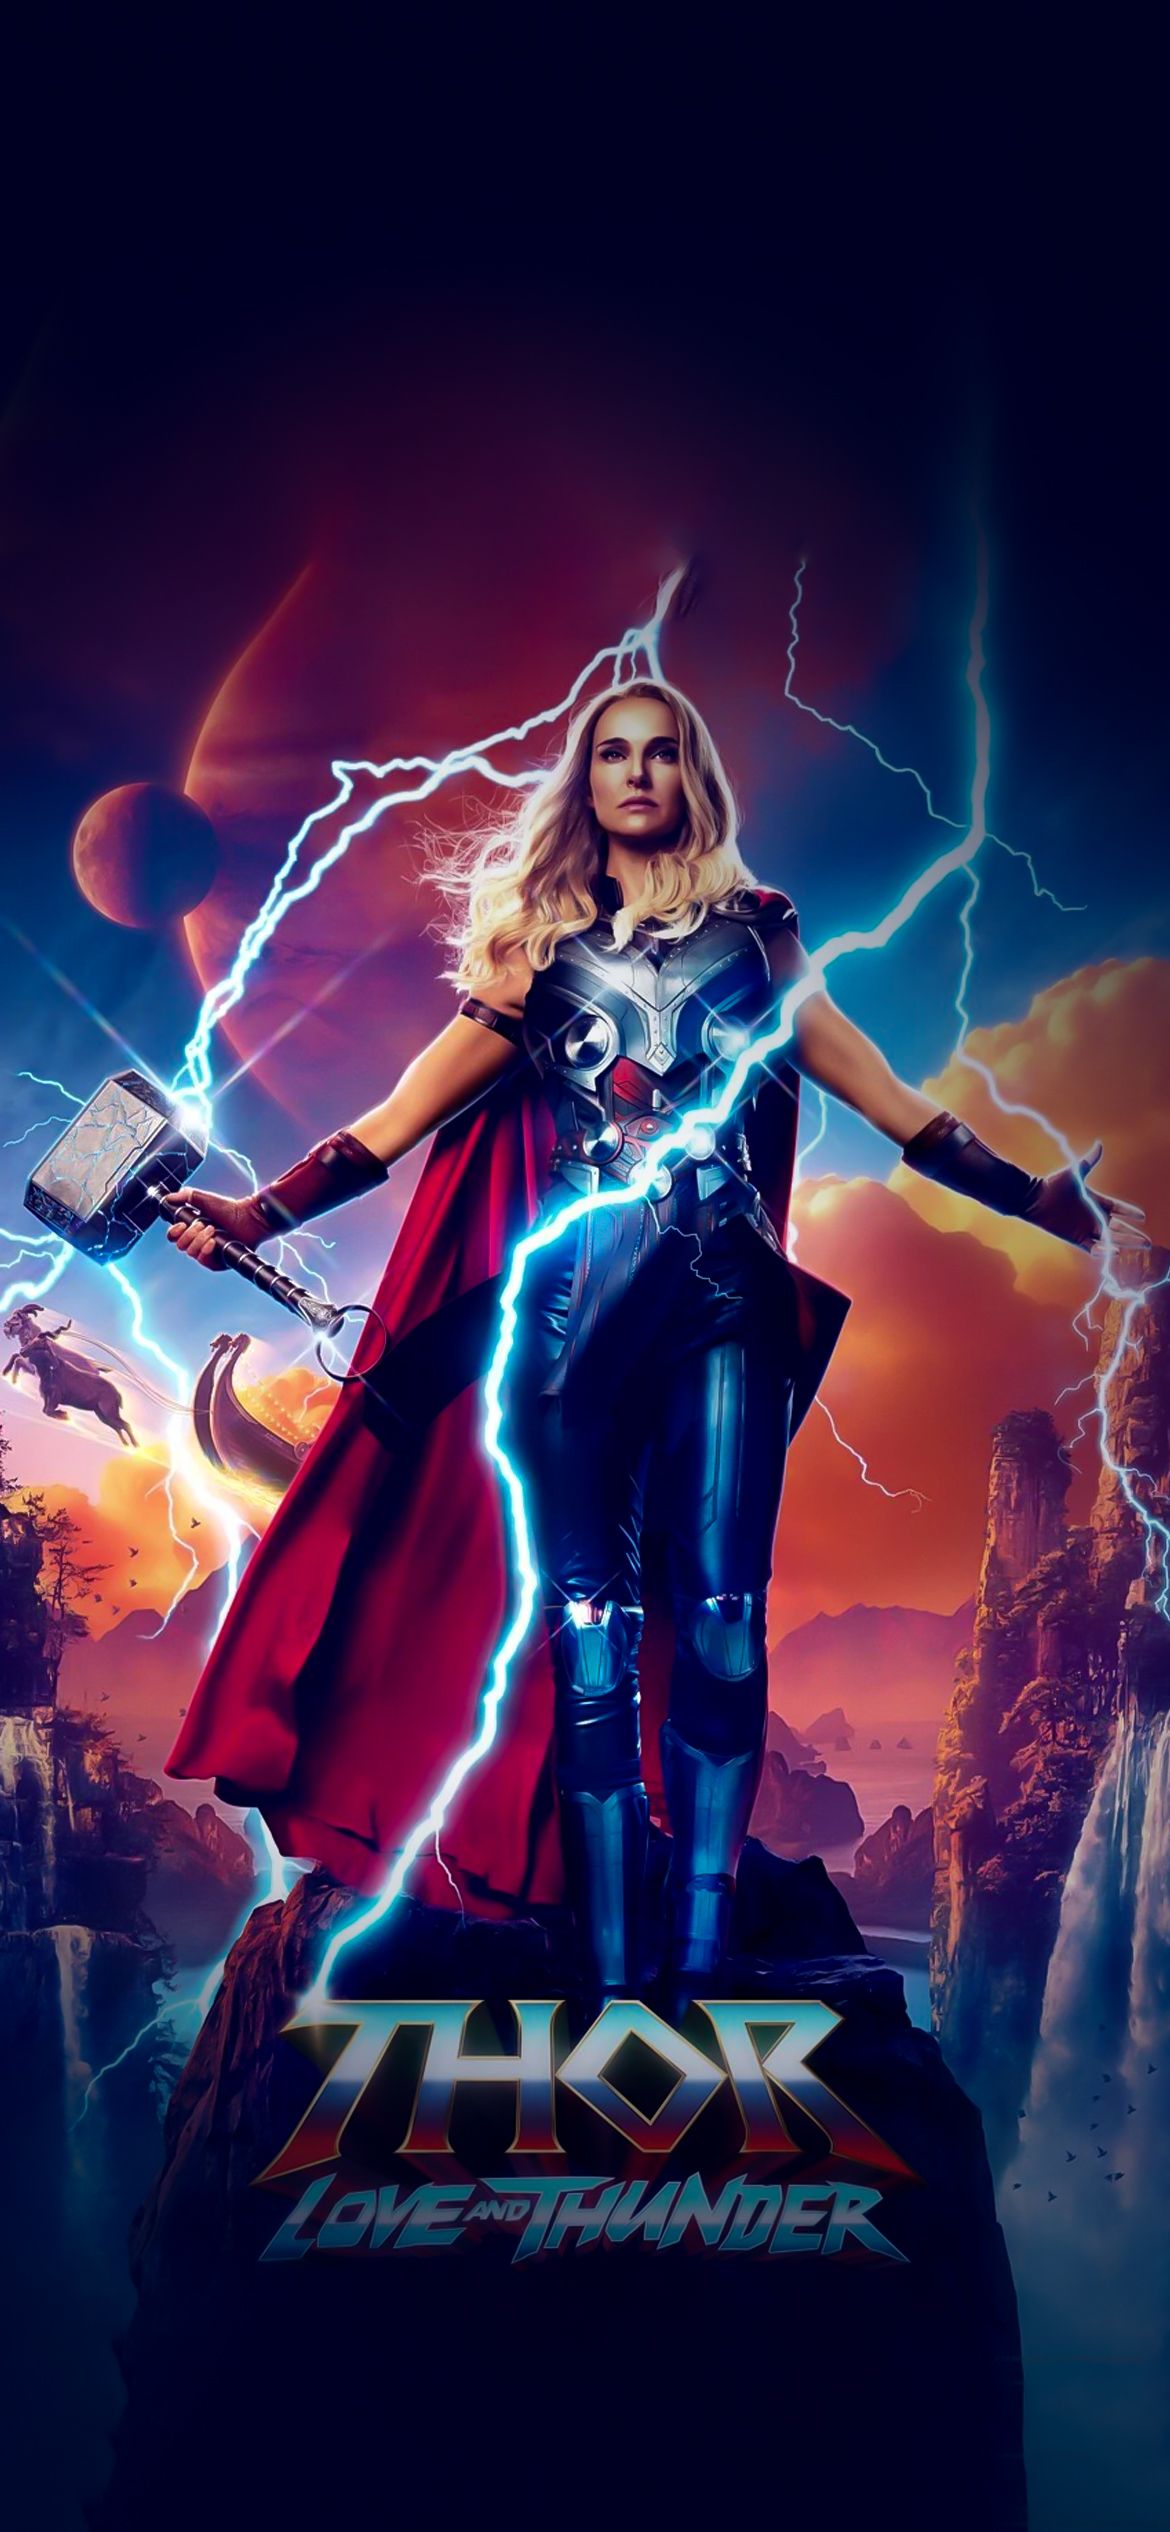 Thor: Love and Thunder Wallpaper for phone